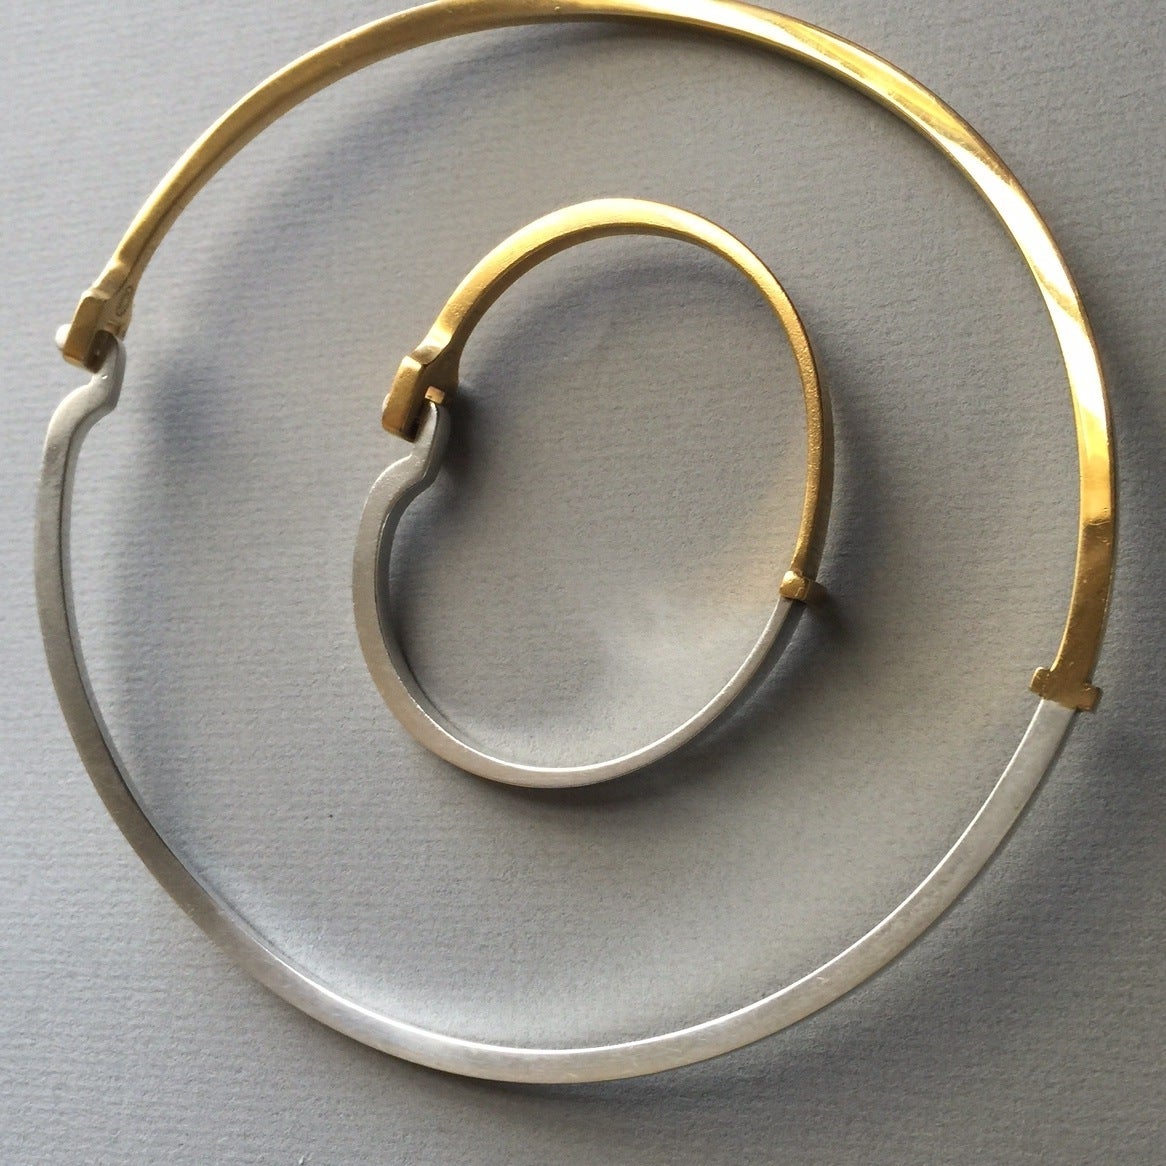 Georg Jensen Sterling Silver & Gold Vermeil Bracelet and Neck Ring Ensemble No. 821B by Andreas Mikkelsen

Modernist sterling silver with gold vermeil neck ring and bracelet ensemble. Simple, timeless design. Both pieces have a unique clasp. 

This